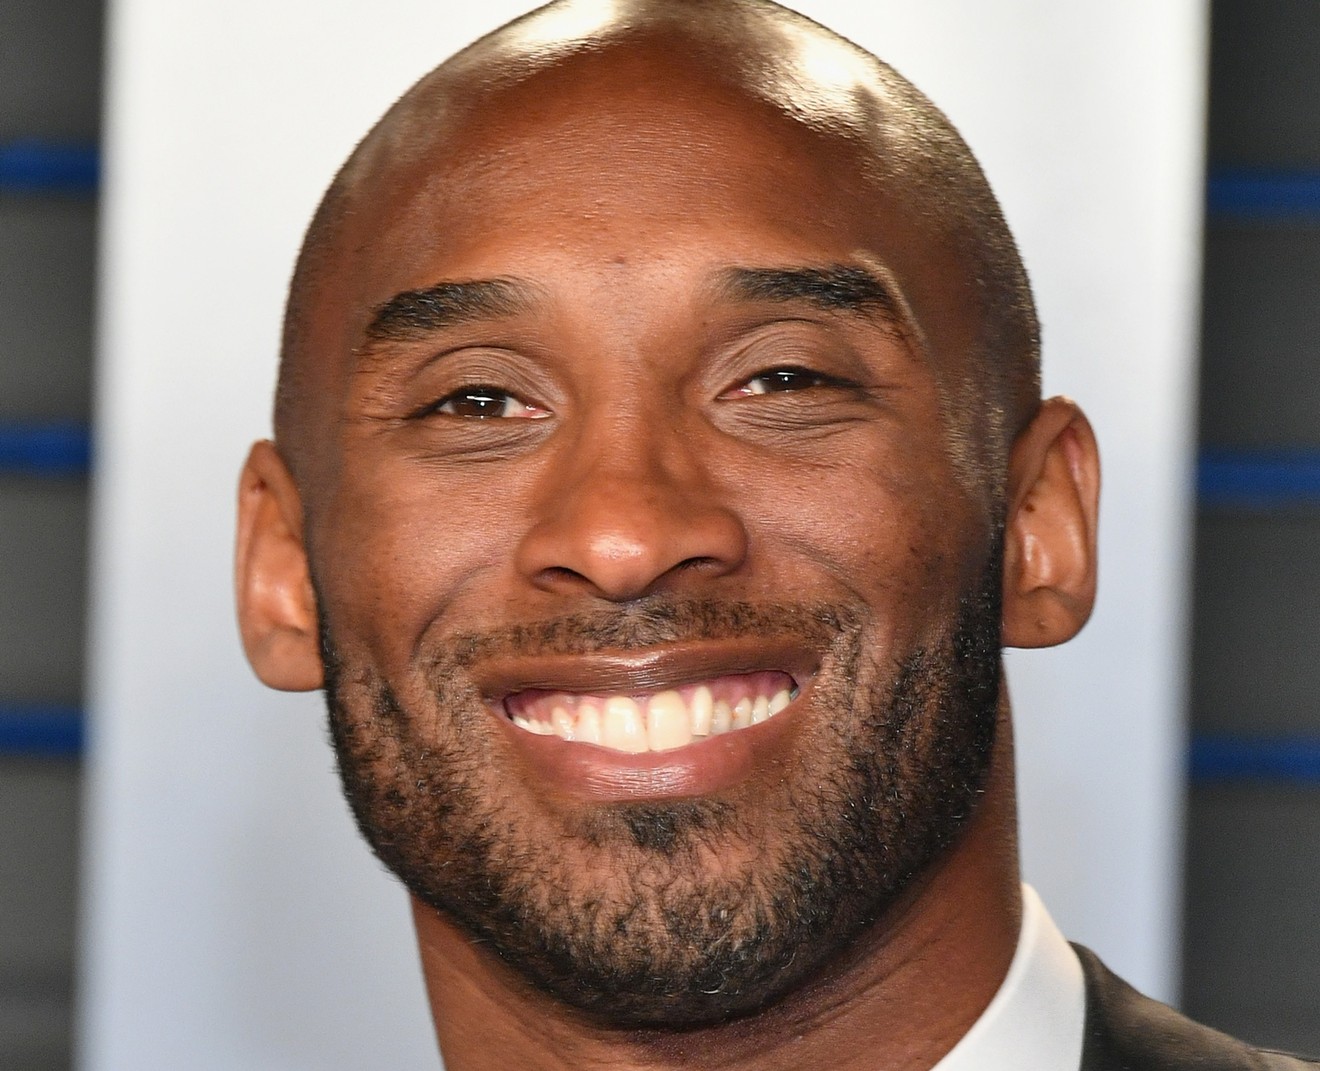 Basketball megastar Kobe Bryant died alongside his daughter Gianna in a helicopter crash on Sunday in Calabasas, California.